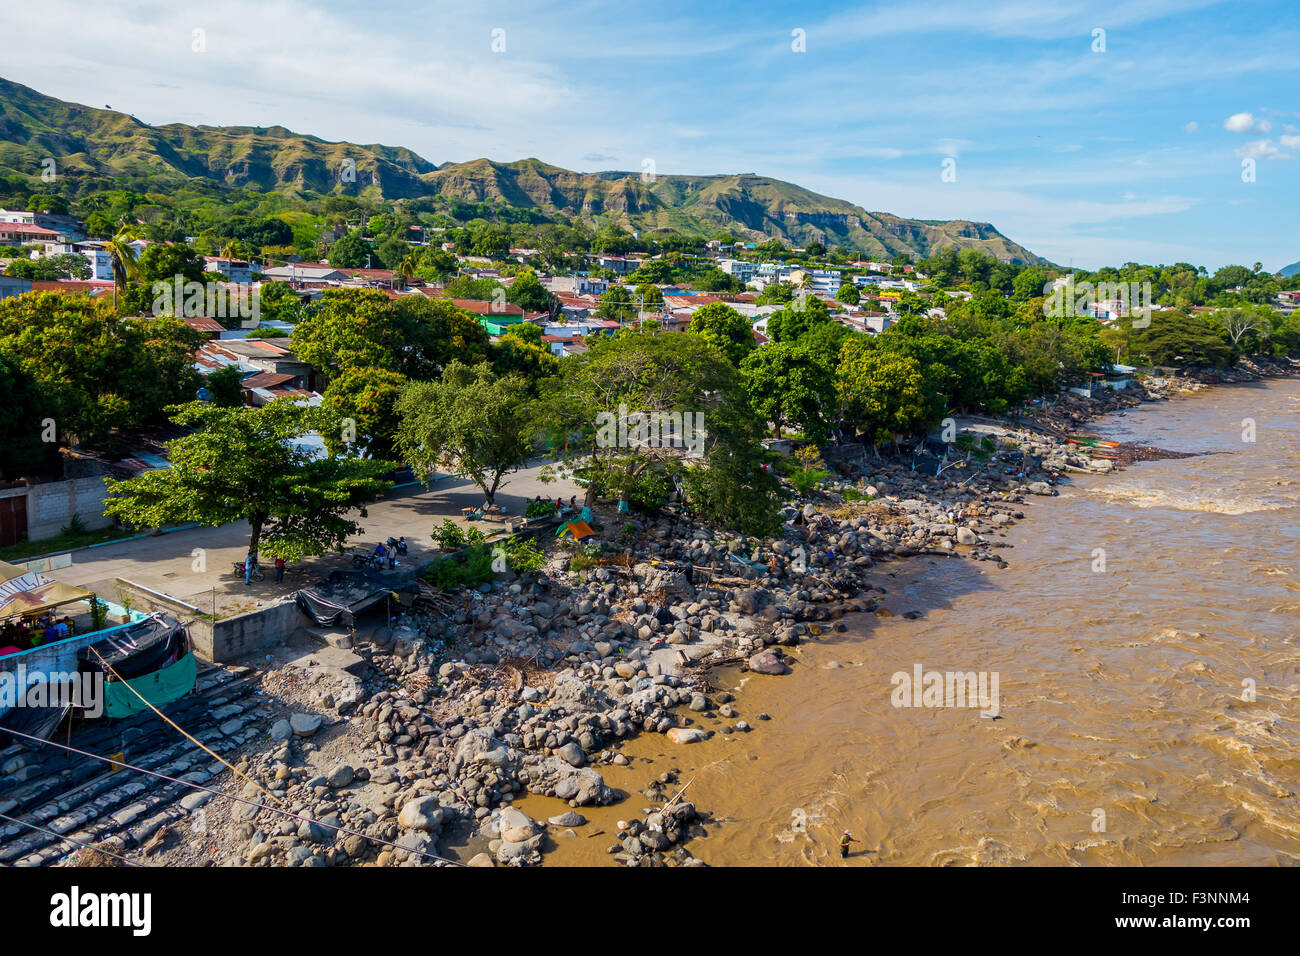 Magdalena river near the town of Honda, Colombia Stock Photo